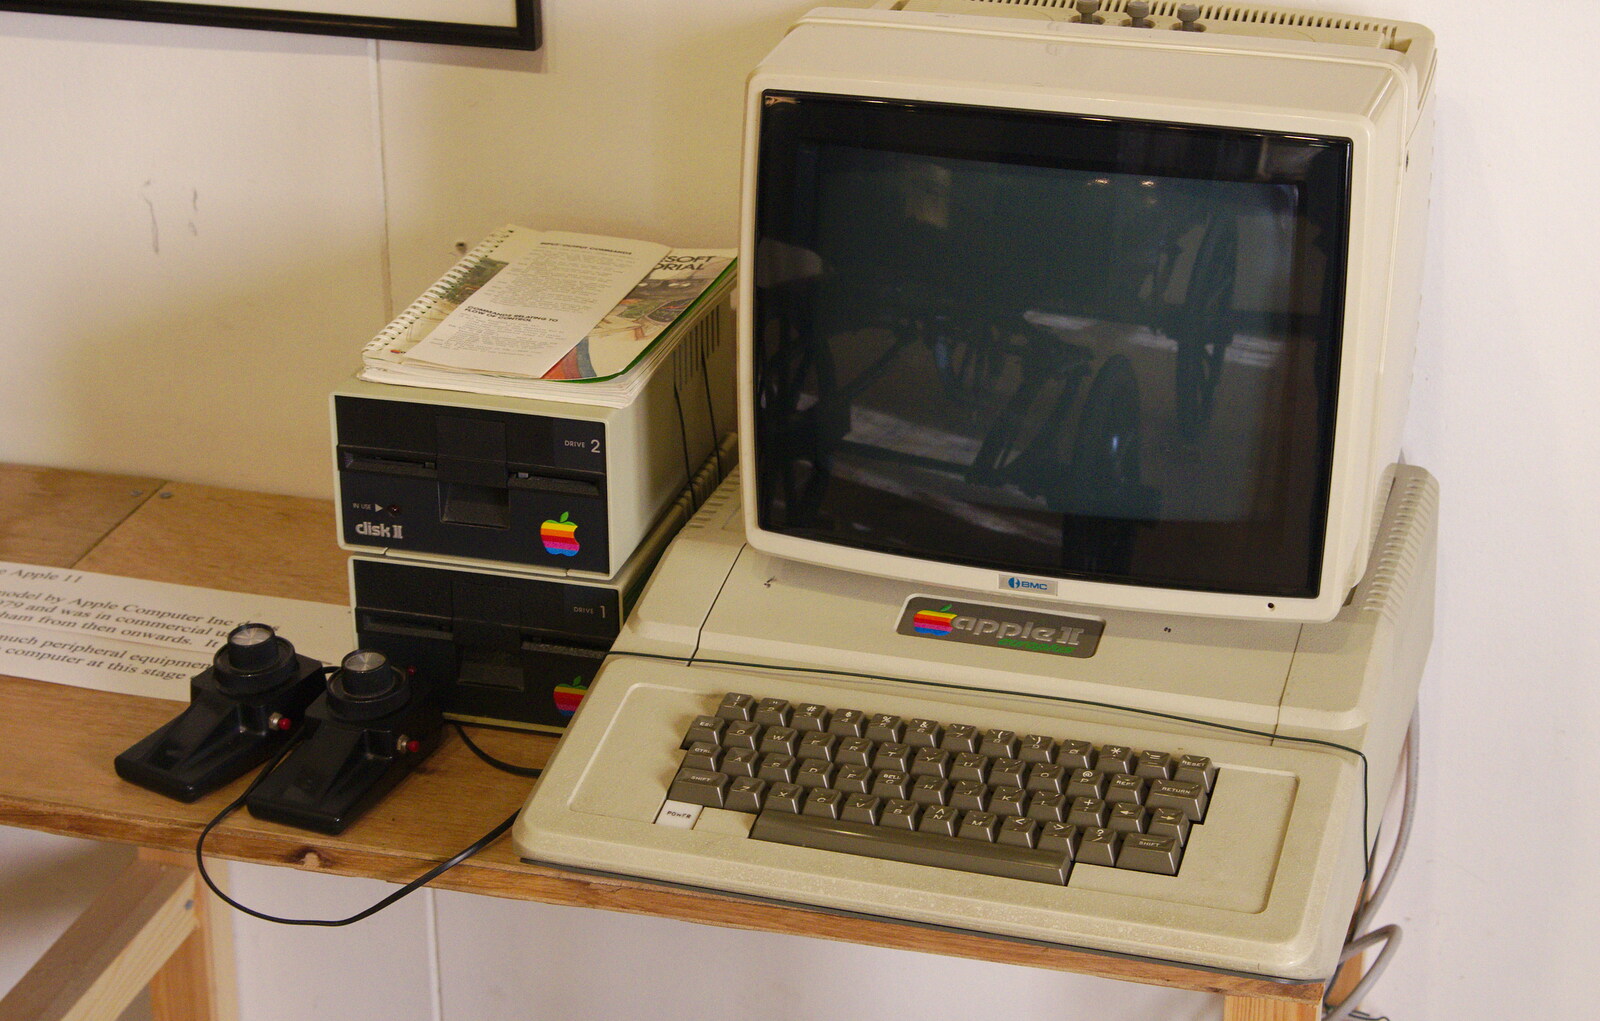 In a small museum, there's an Apple ][ Europlus from A Trip to Framlingham Castle, Framlingham, Suffolk - 16th February 2014